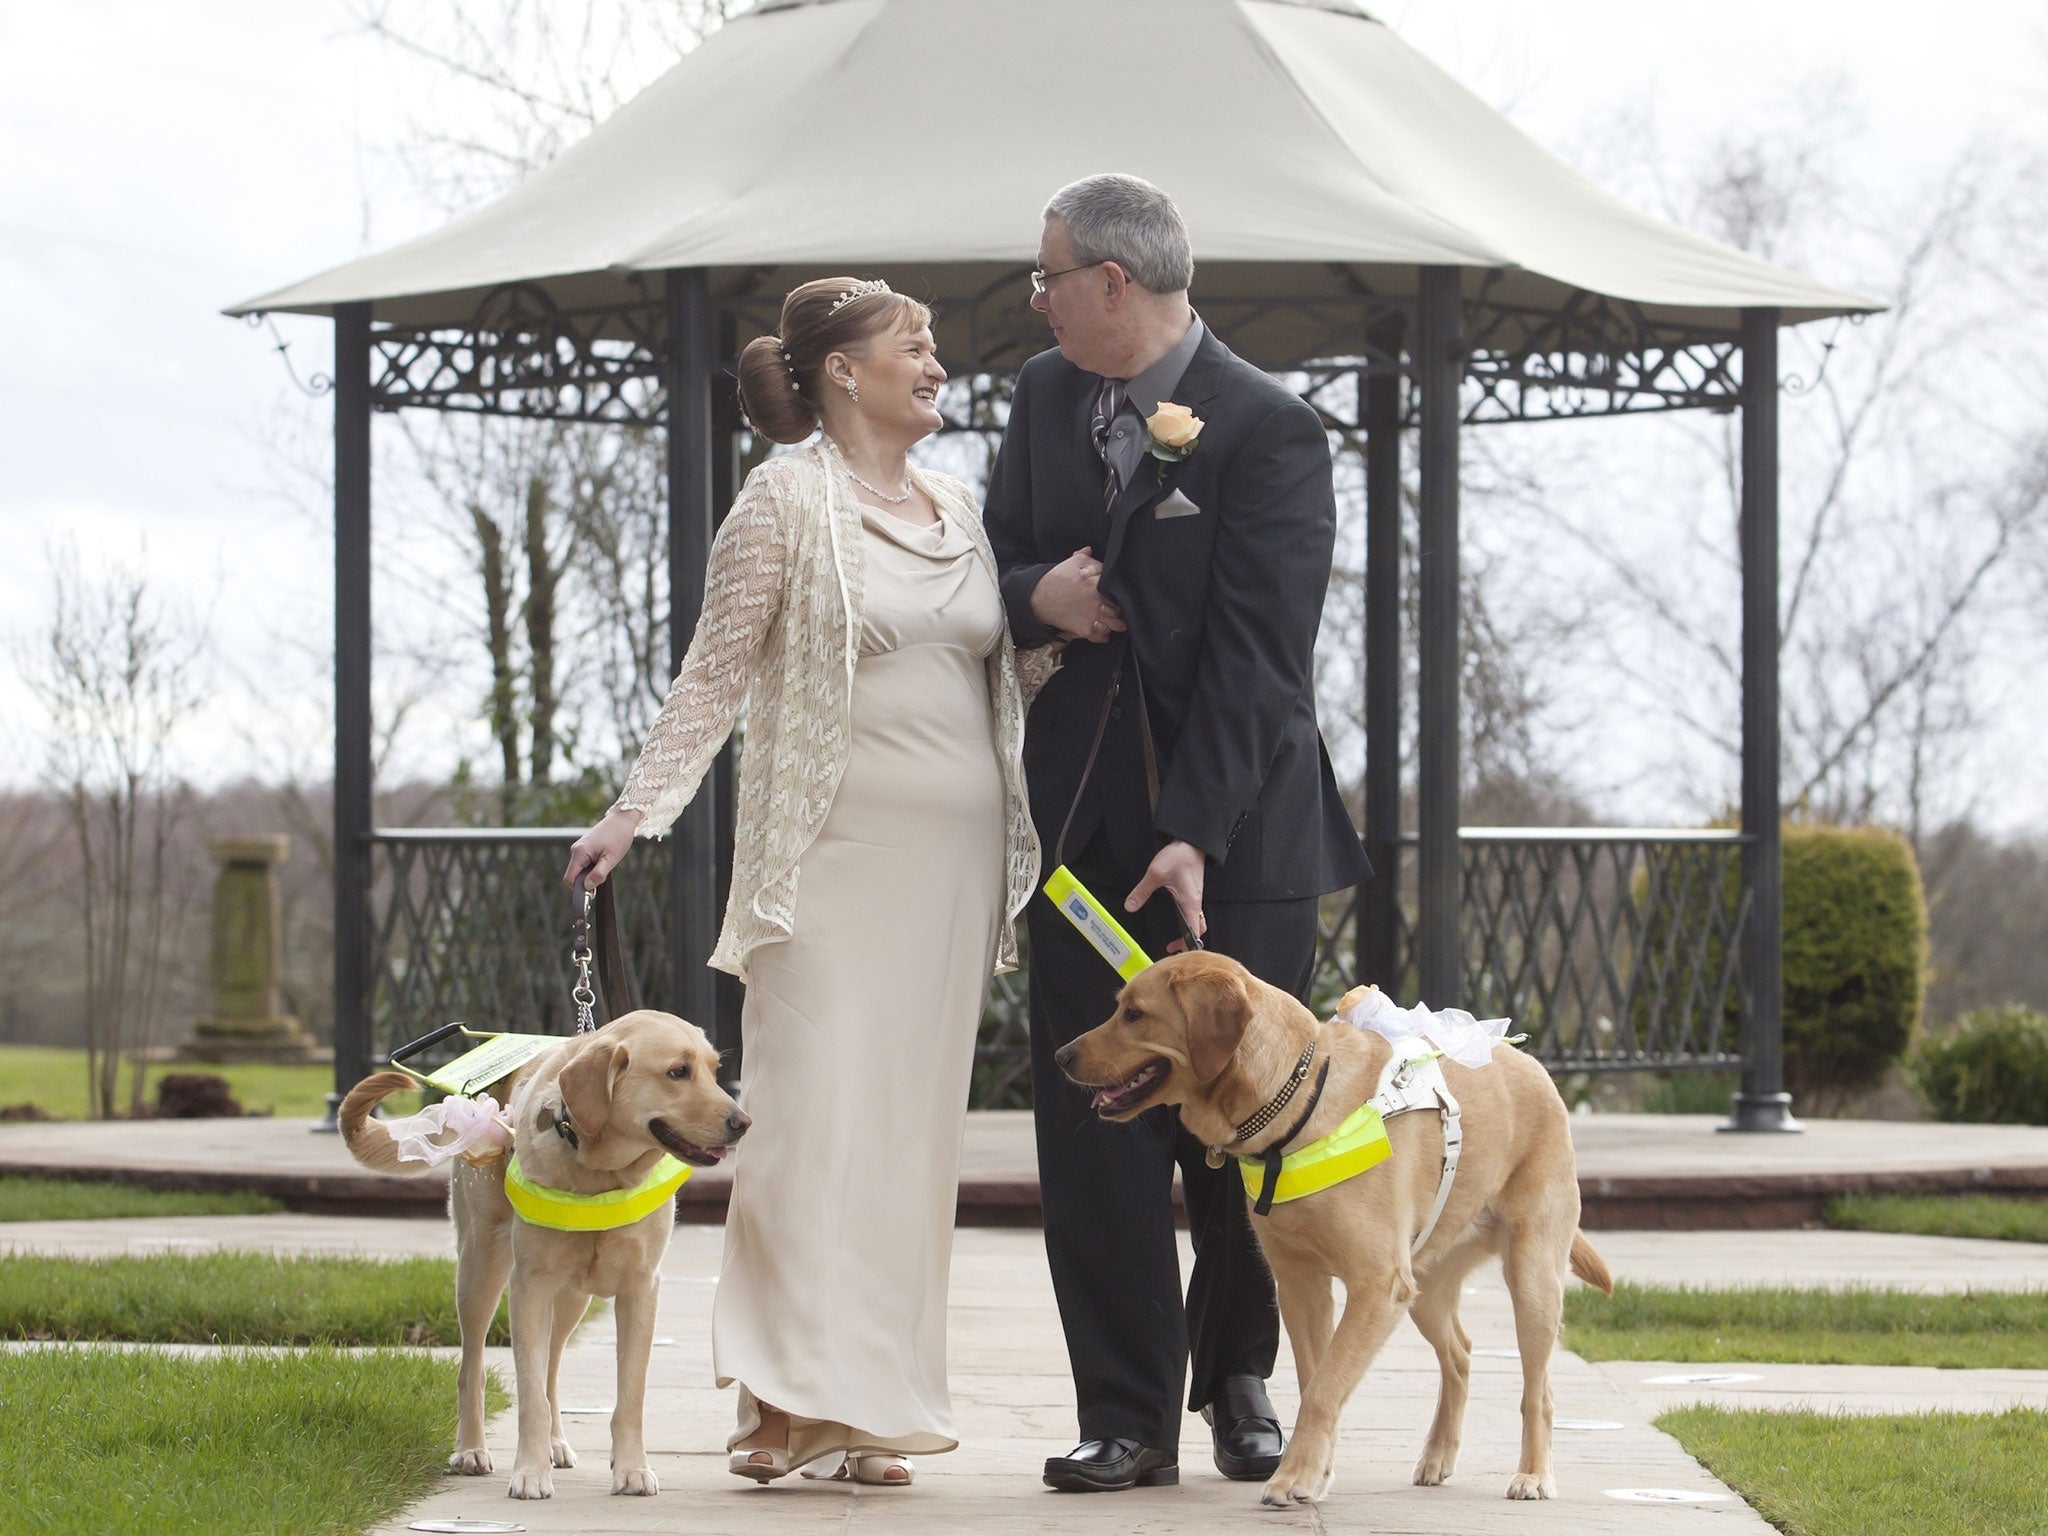 Guide dog owners Claire Johnson, 50 and Mark Gaffey, 51, got married in Baralston, Stoke-on-Trent, after their dogs fell in love at training two years ago